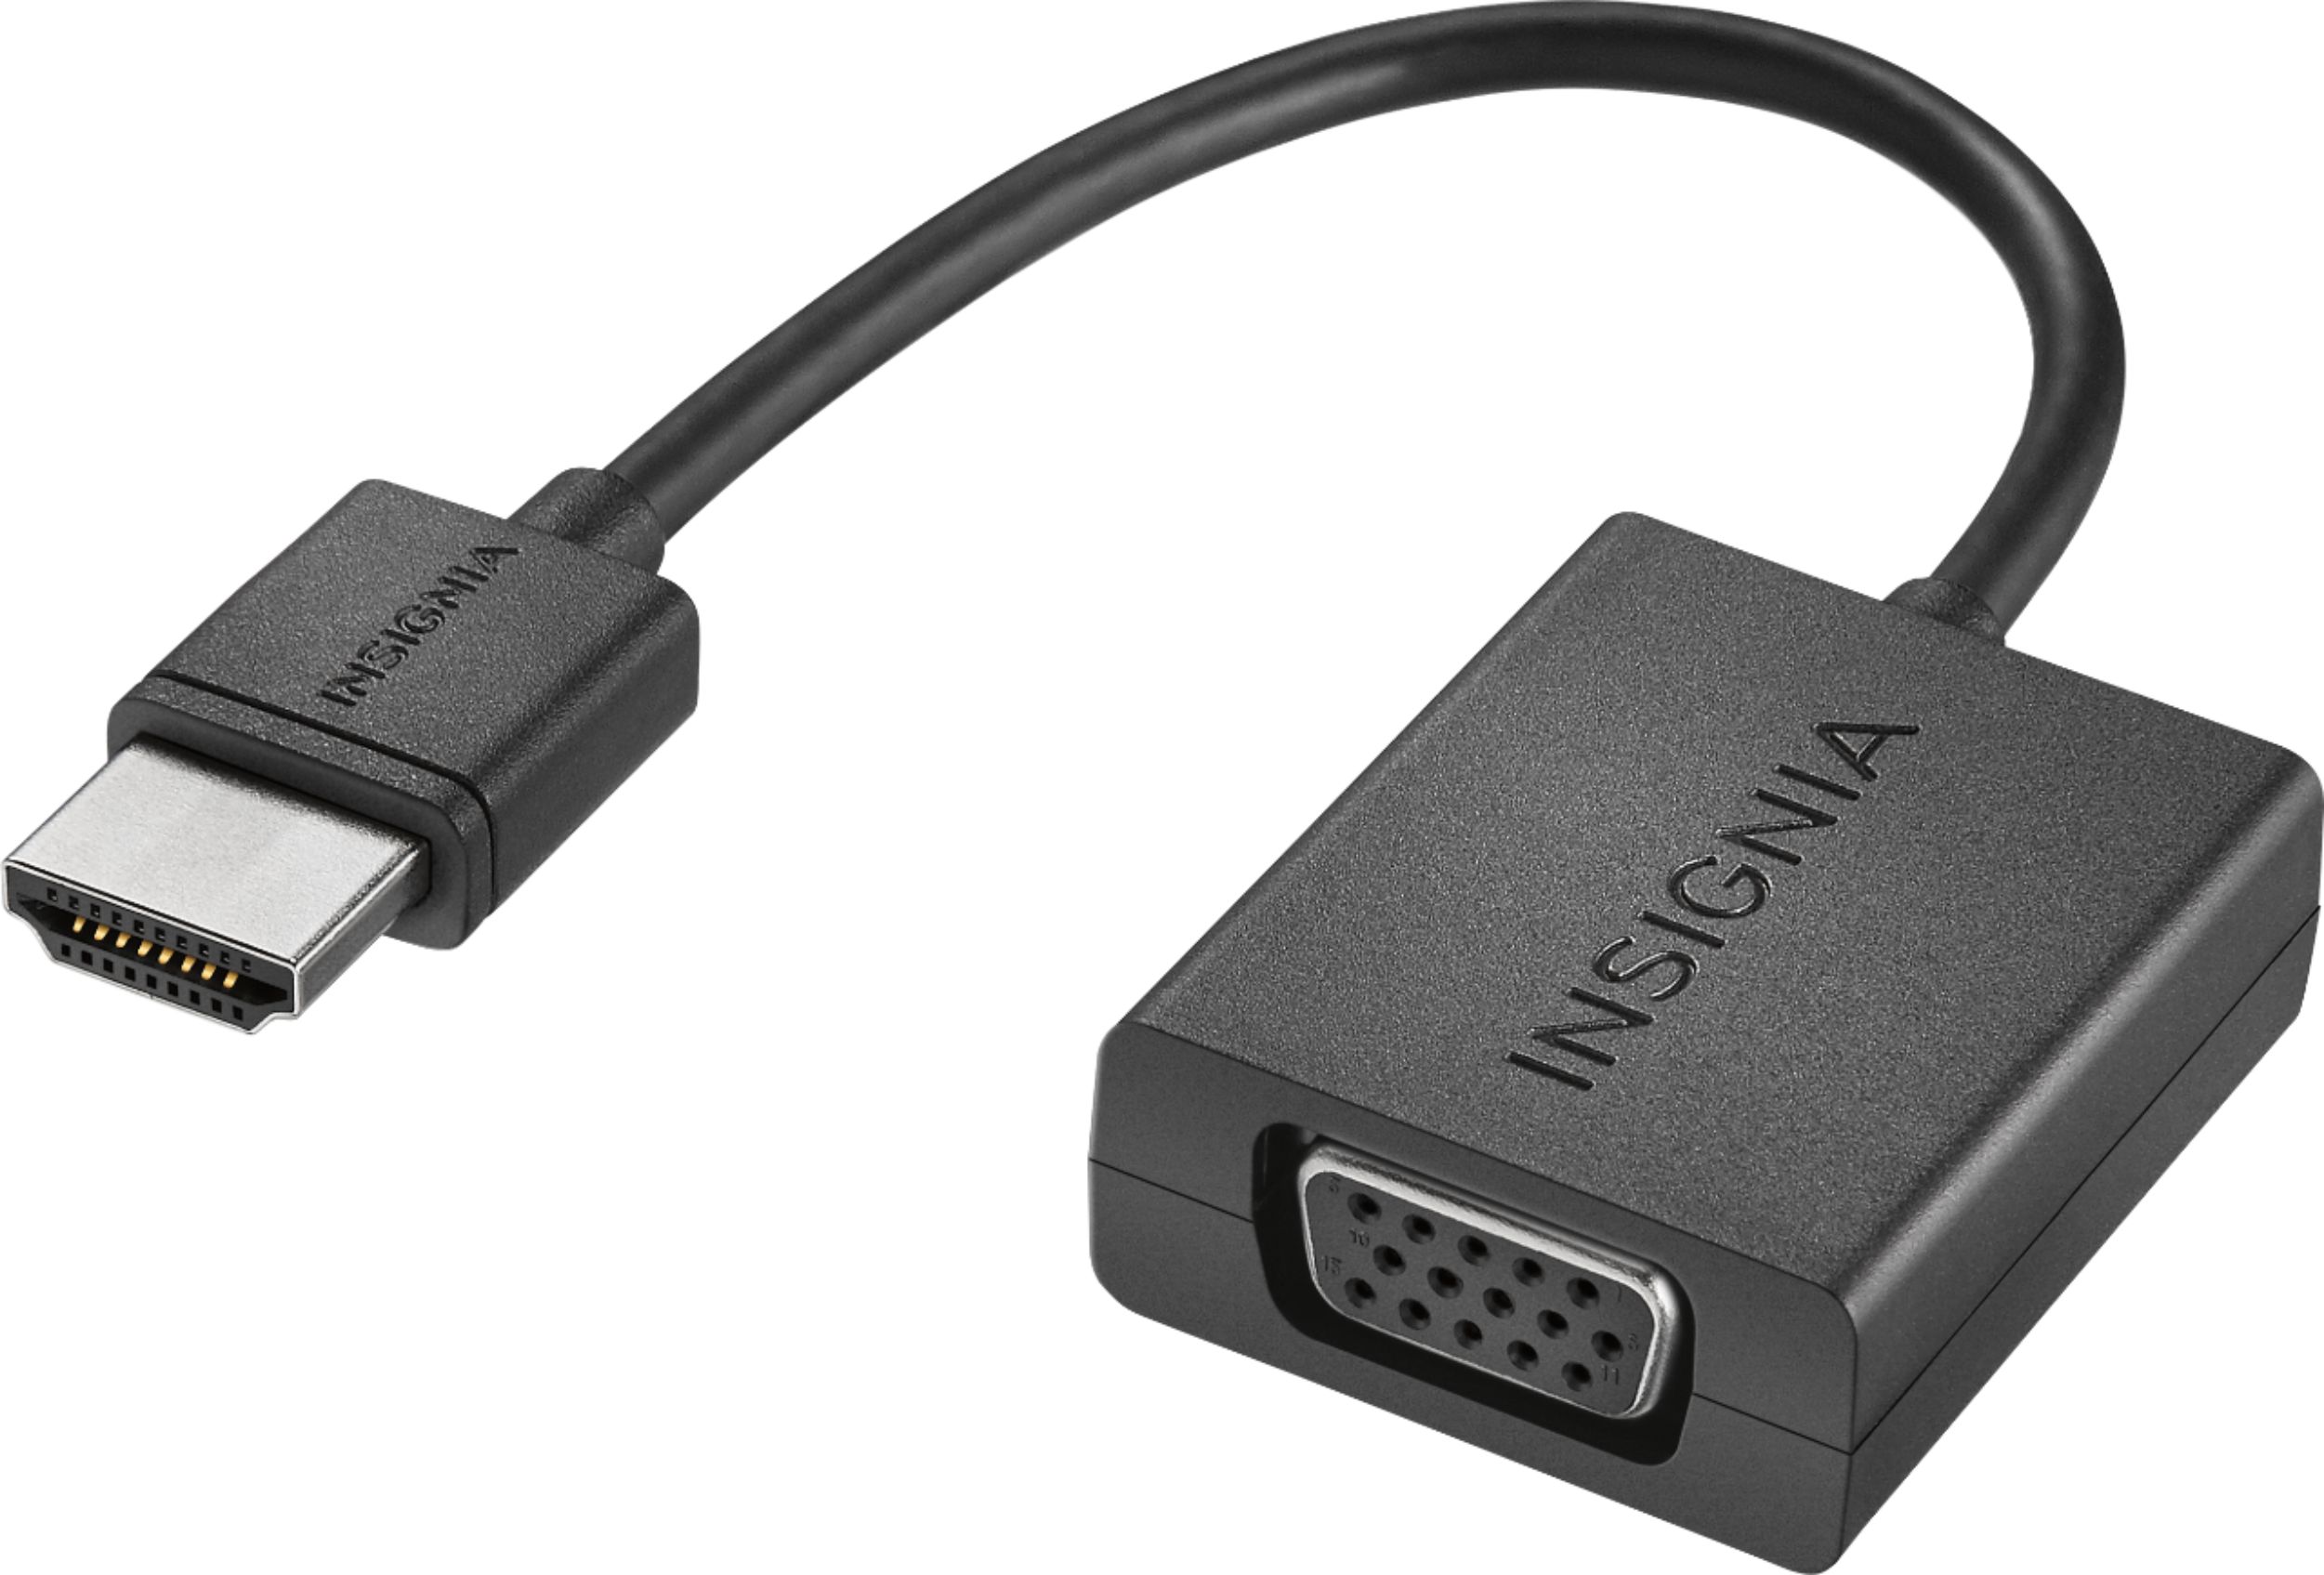 11 Best HDMI To Vga Adapter With Audio for 2023